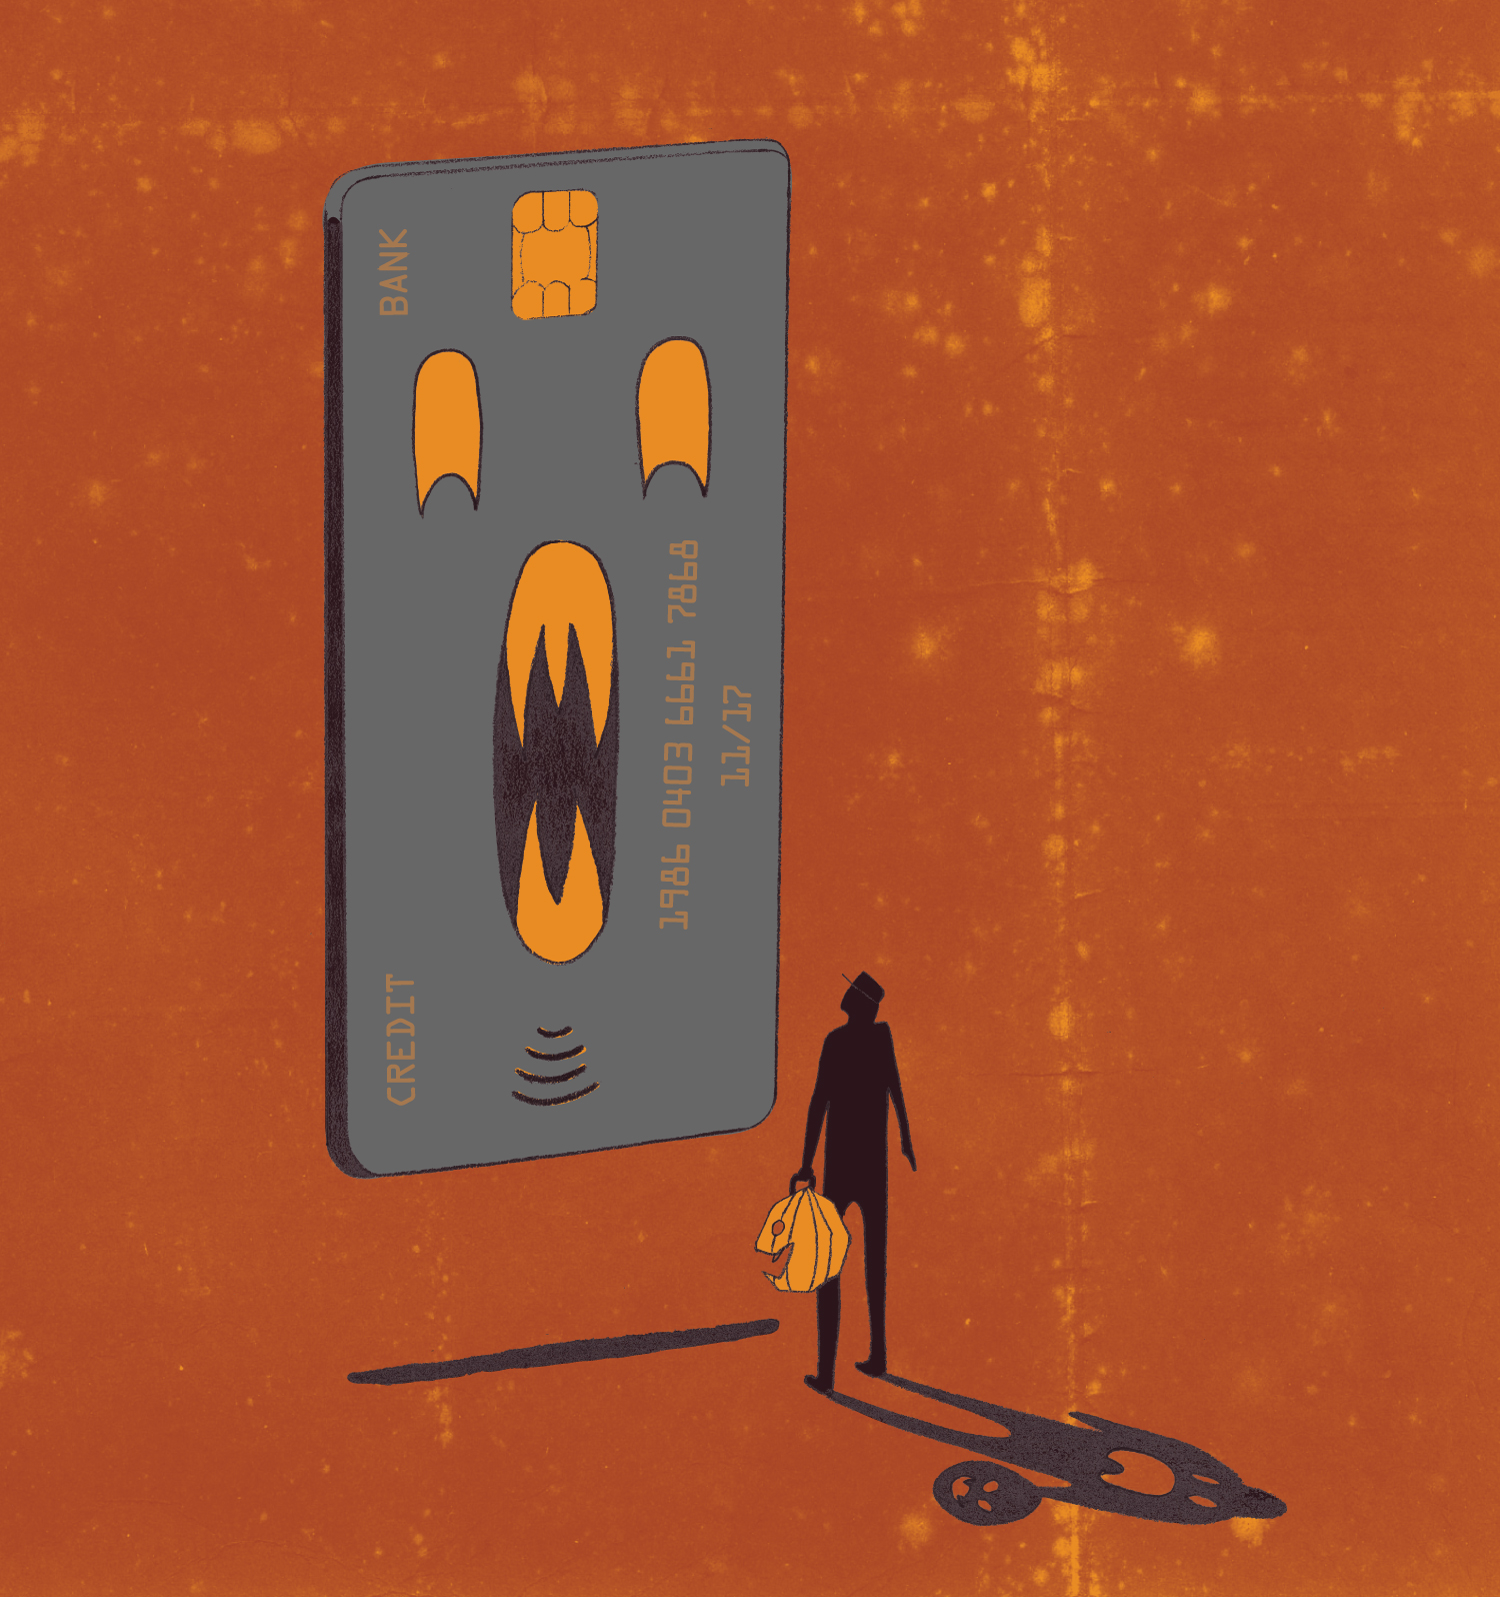 Credit cards are scarier than monsters